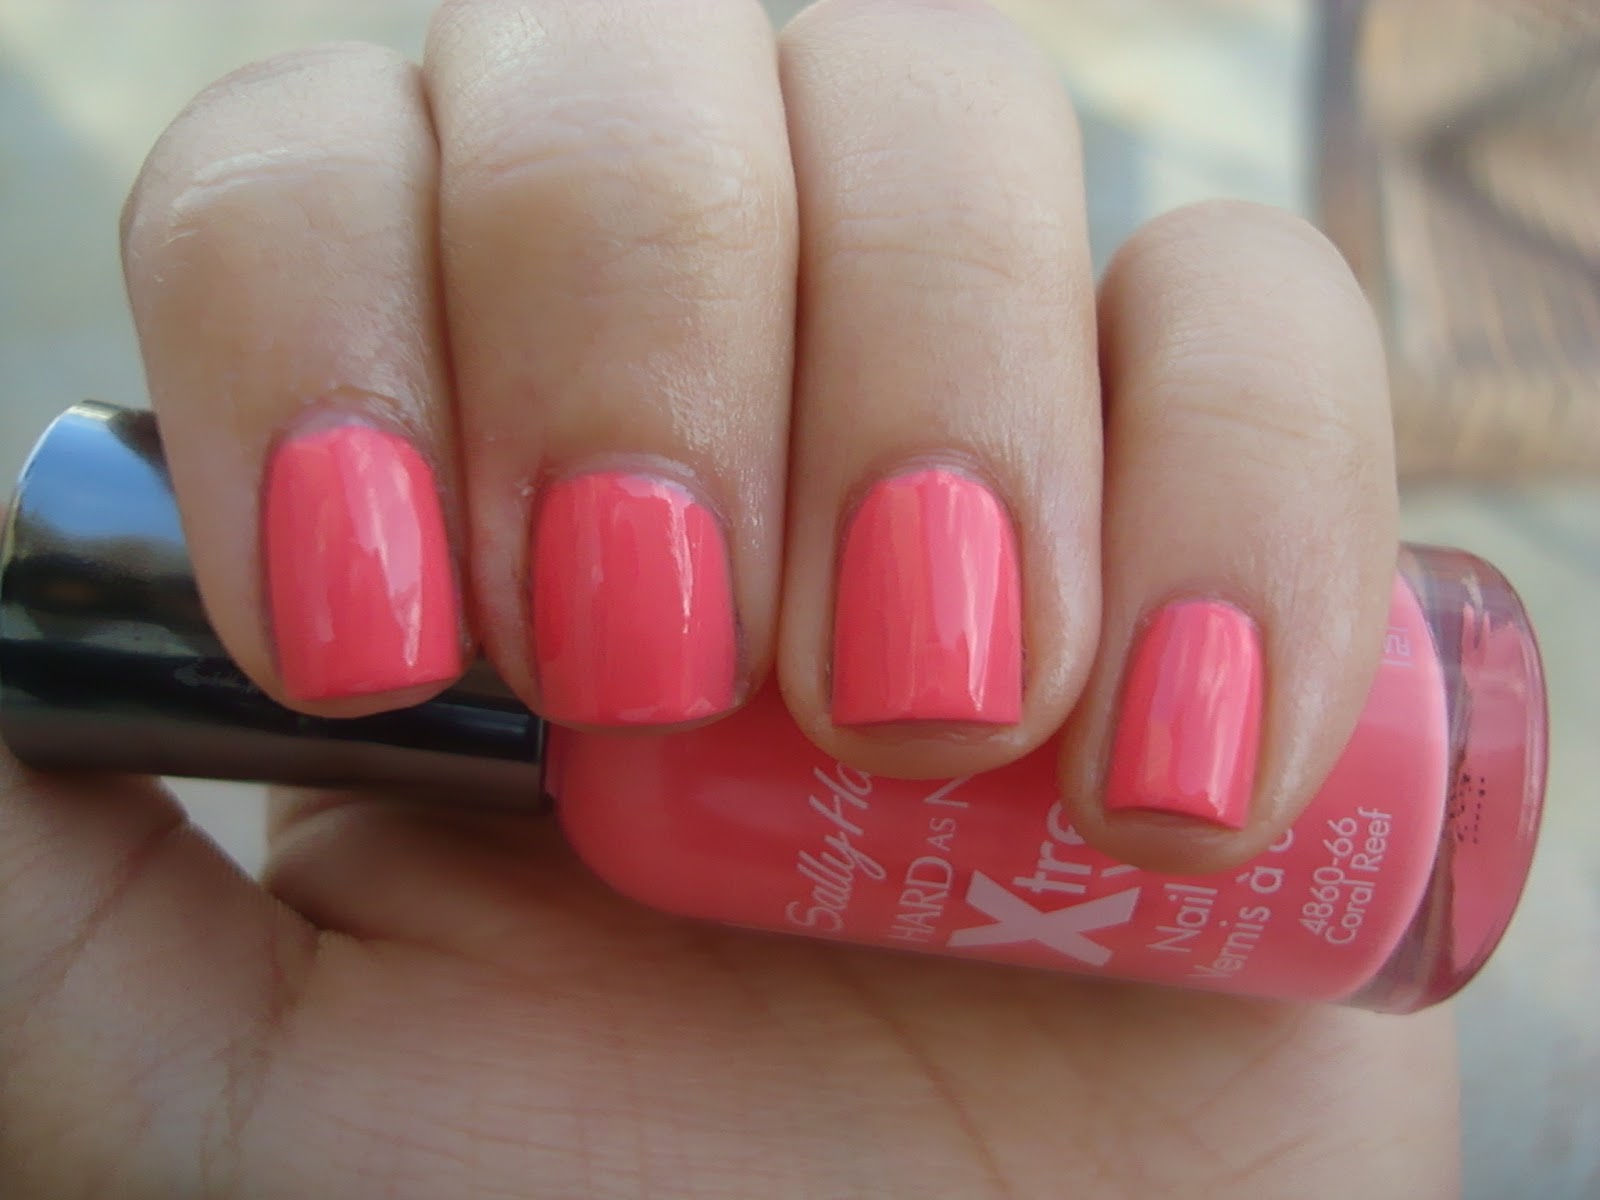 10. Sally Hansen Hard as Nails Xtreme Wear in "Coral Reef" - wide 11